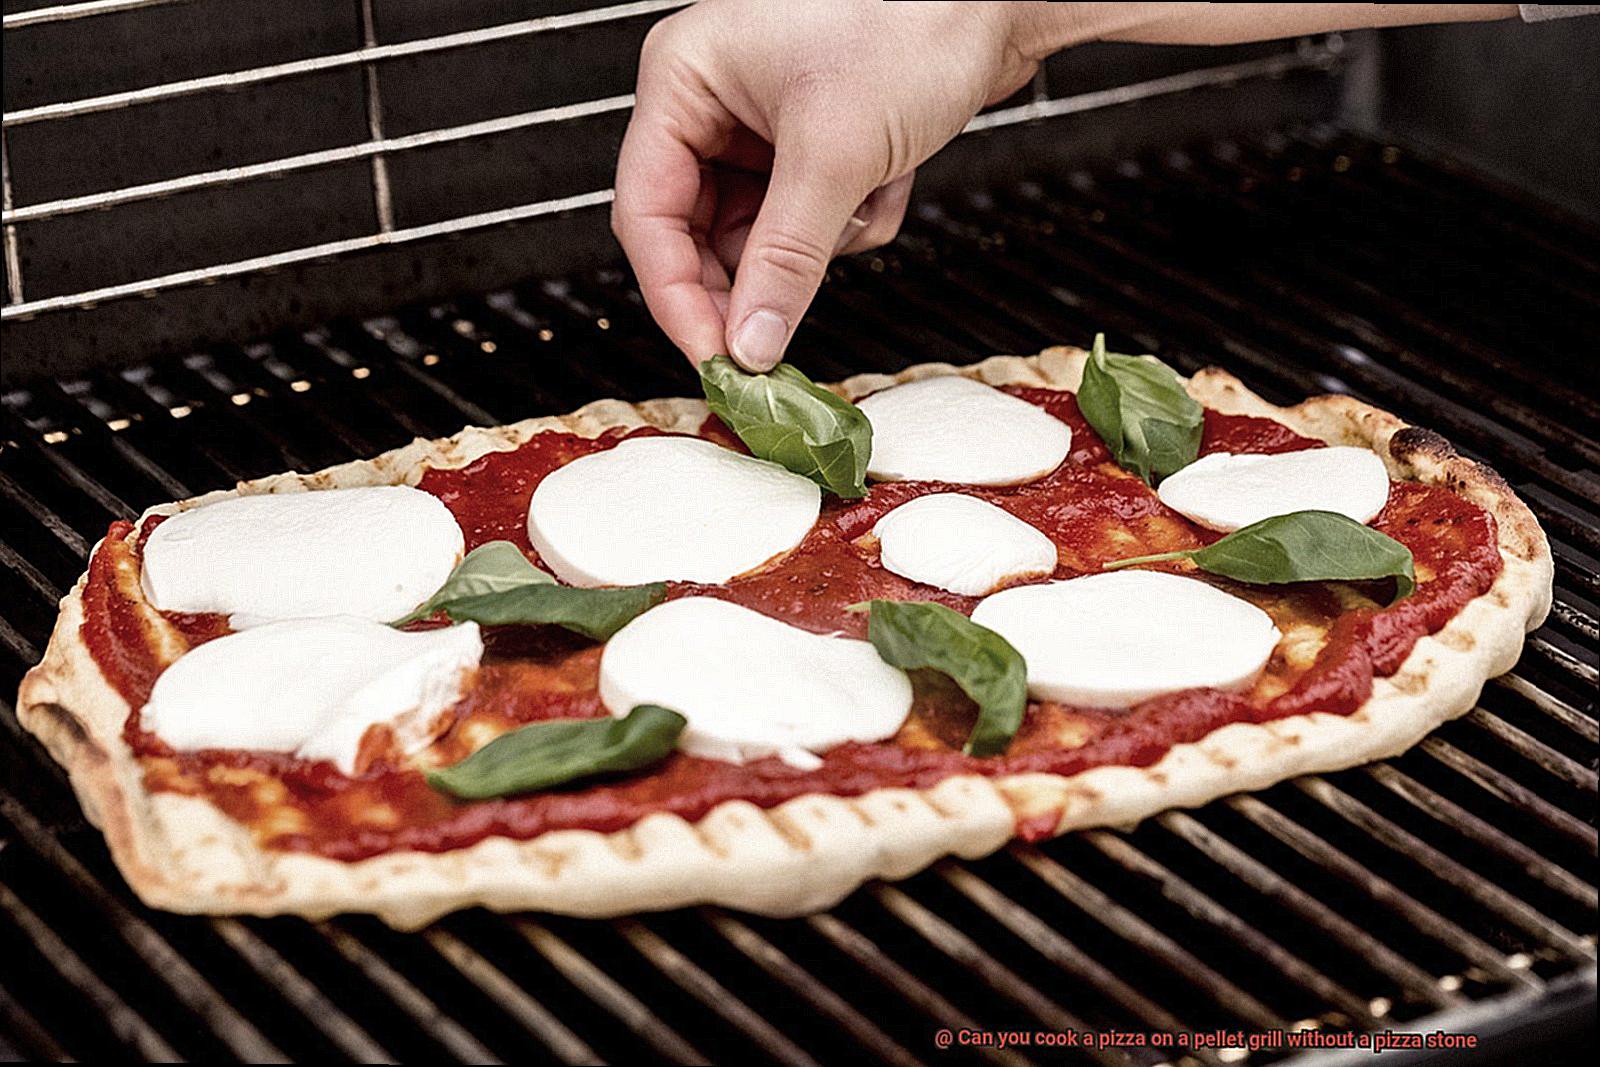 Can you cook a pizza on a pellet grill without a pizza stone-8